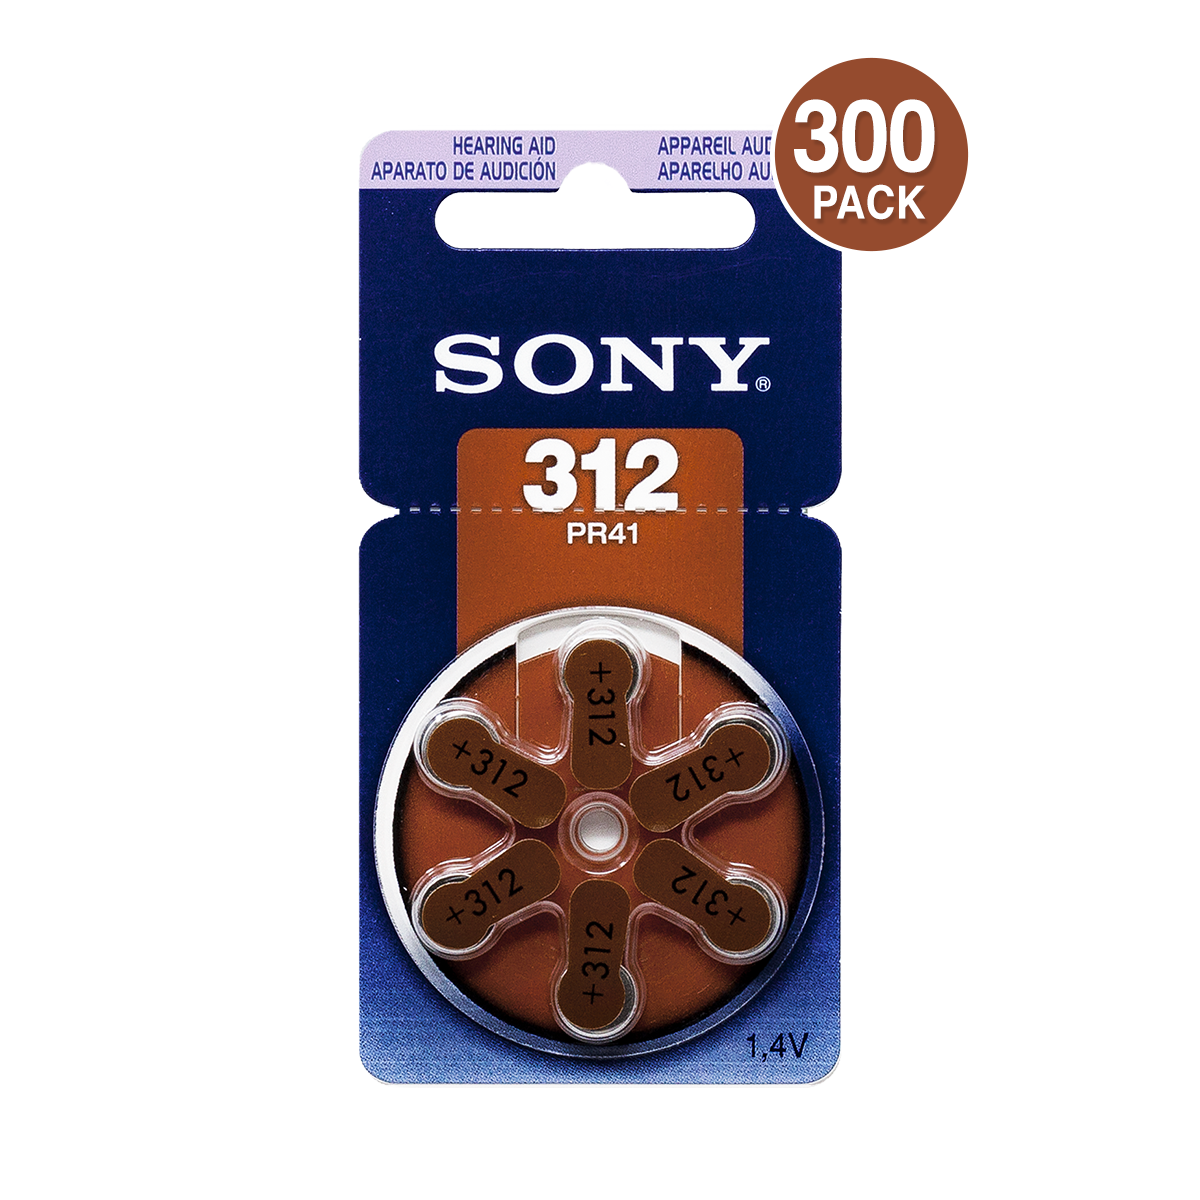 Sony Hearing Aid Battery, Size 312 (300 pc)